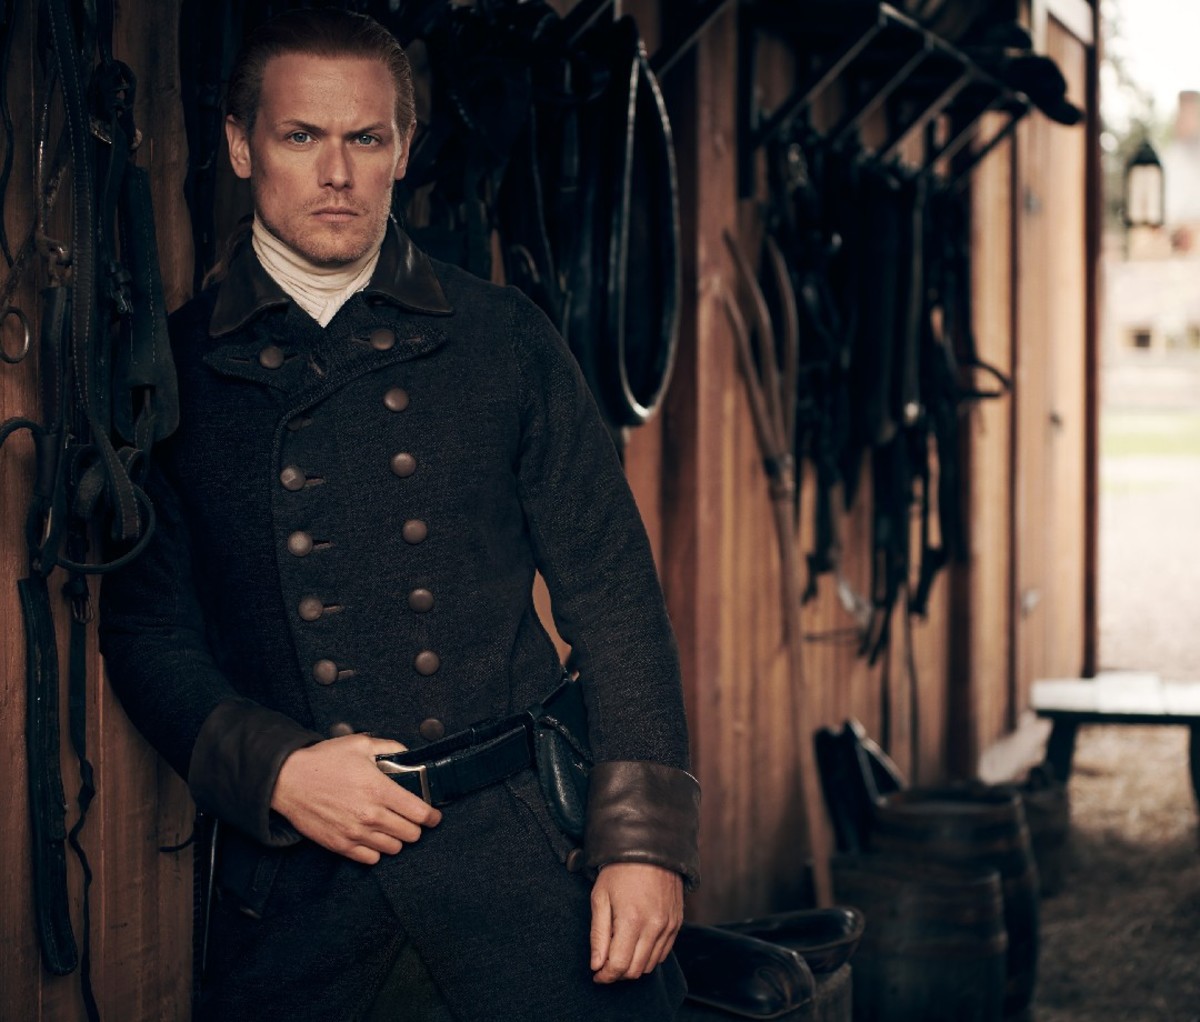 'Outlander' star Sam Heughan stands beside a horse stable wall in character in a dark double breasted jacket